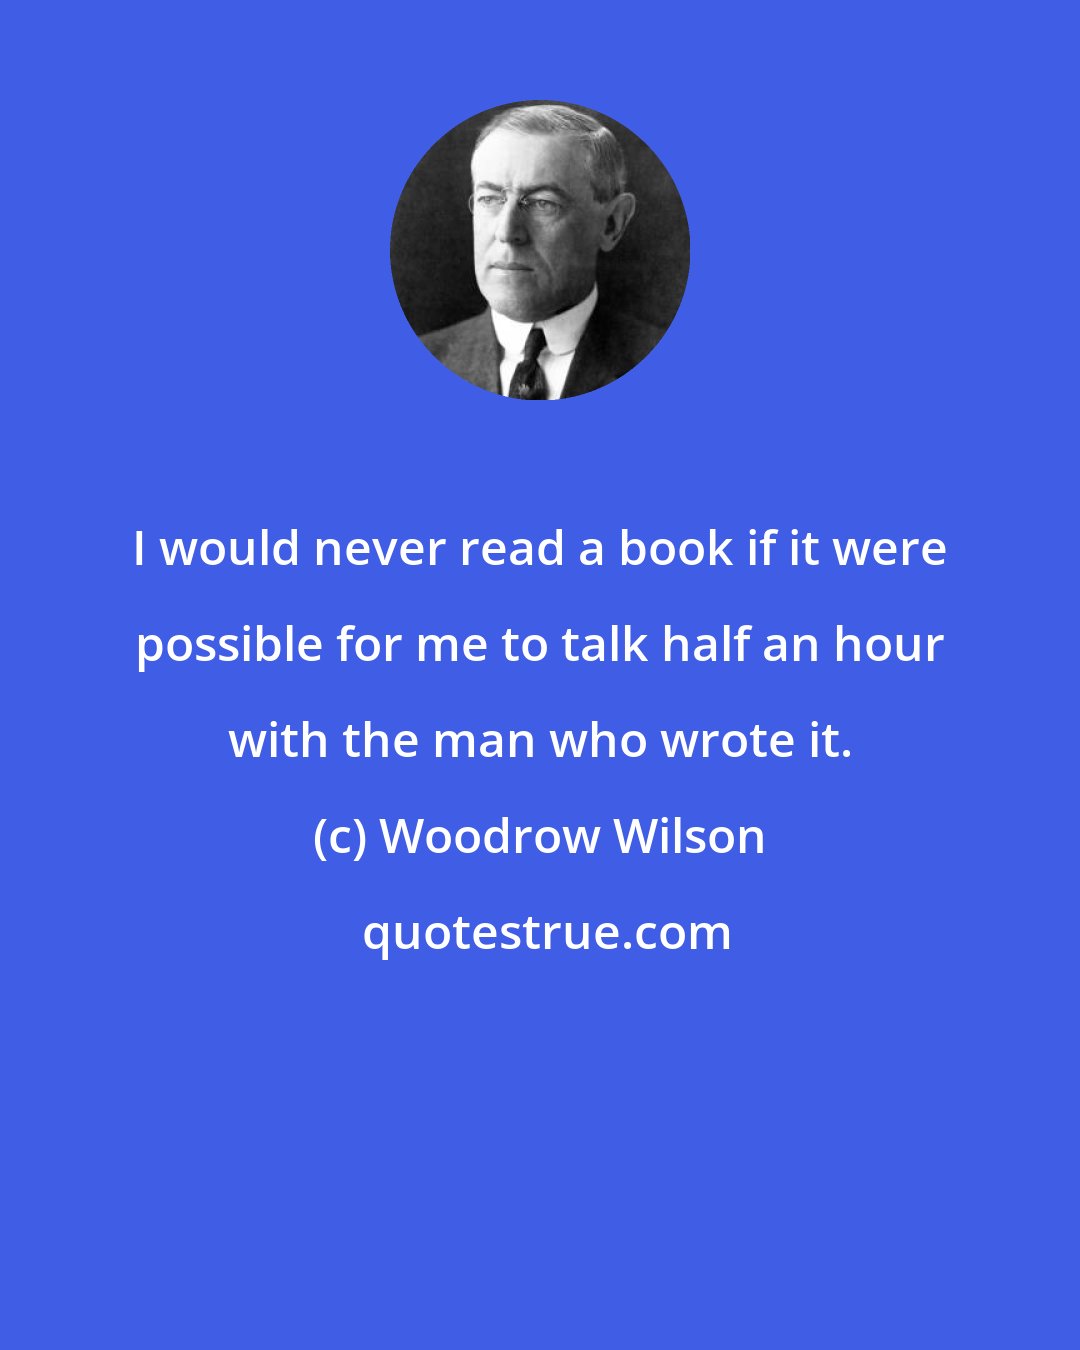 Woodrow Wilson: I would never read a book if it were possible for me to talk half an hour with the man who wrote it.